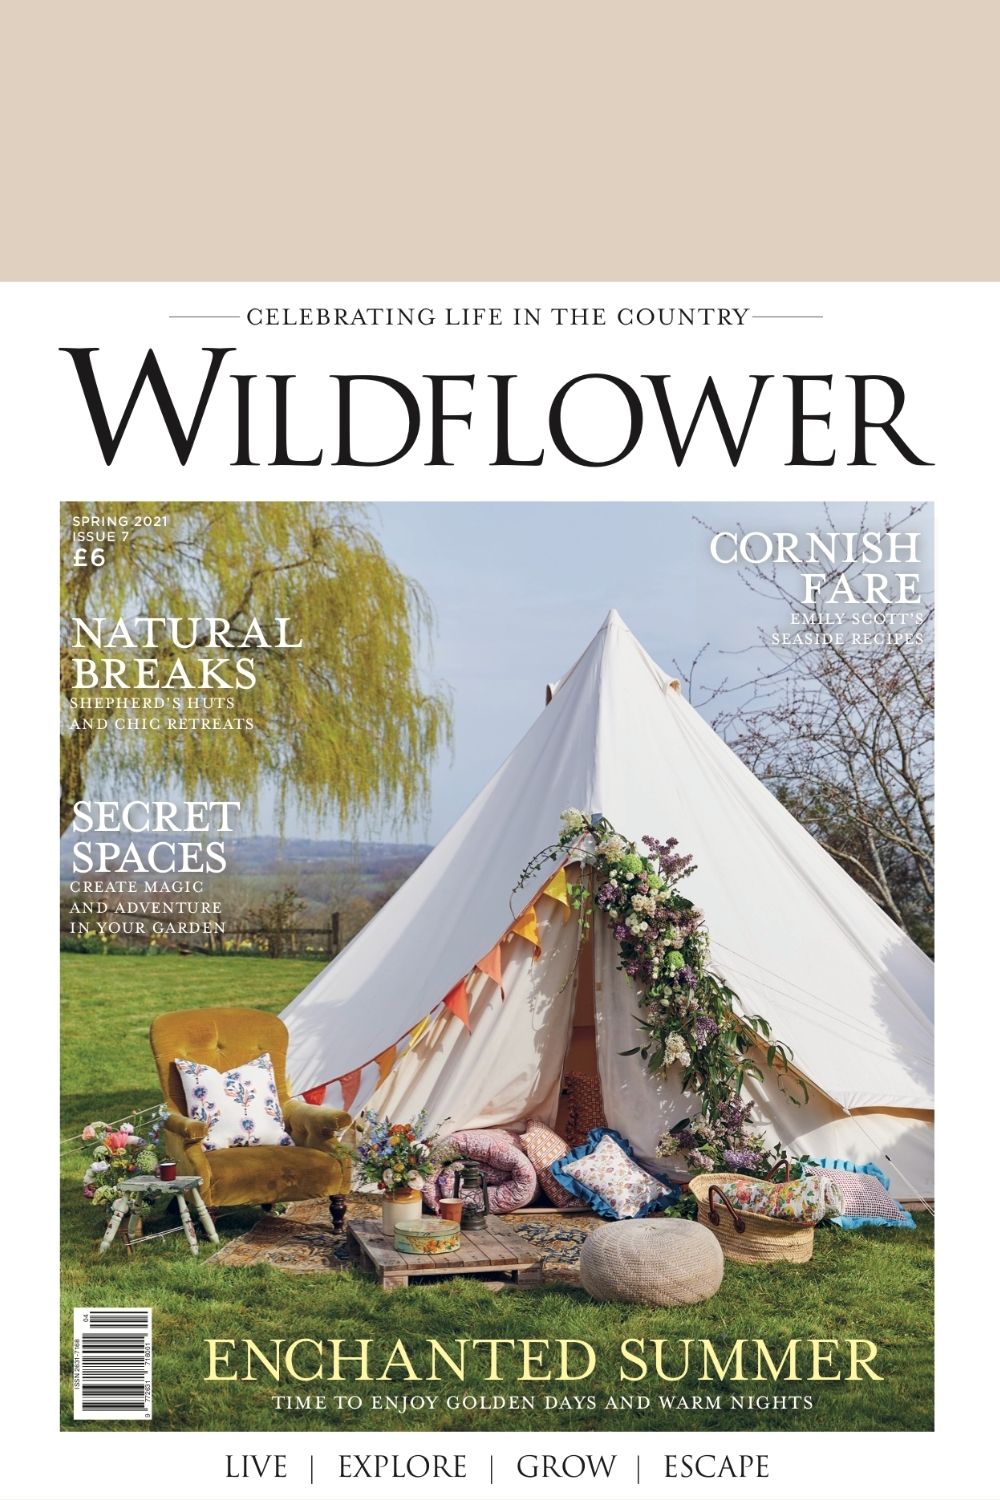 Front cover of Wildflower magazine issue 7 at Pics & Ink